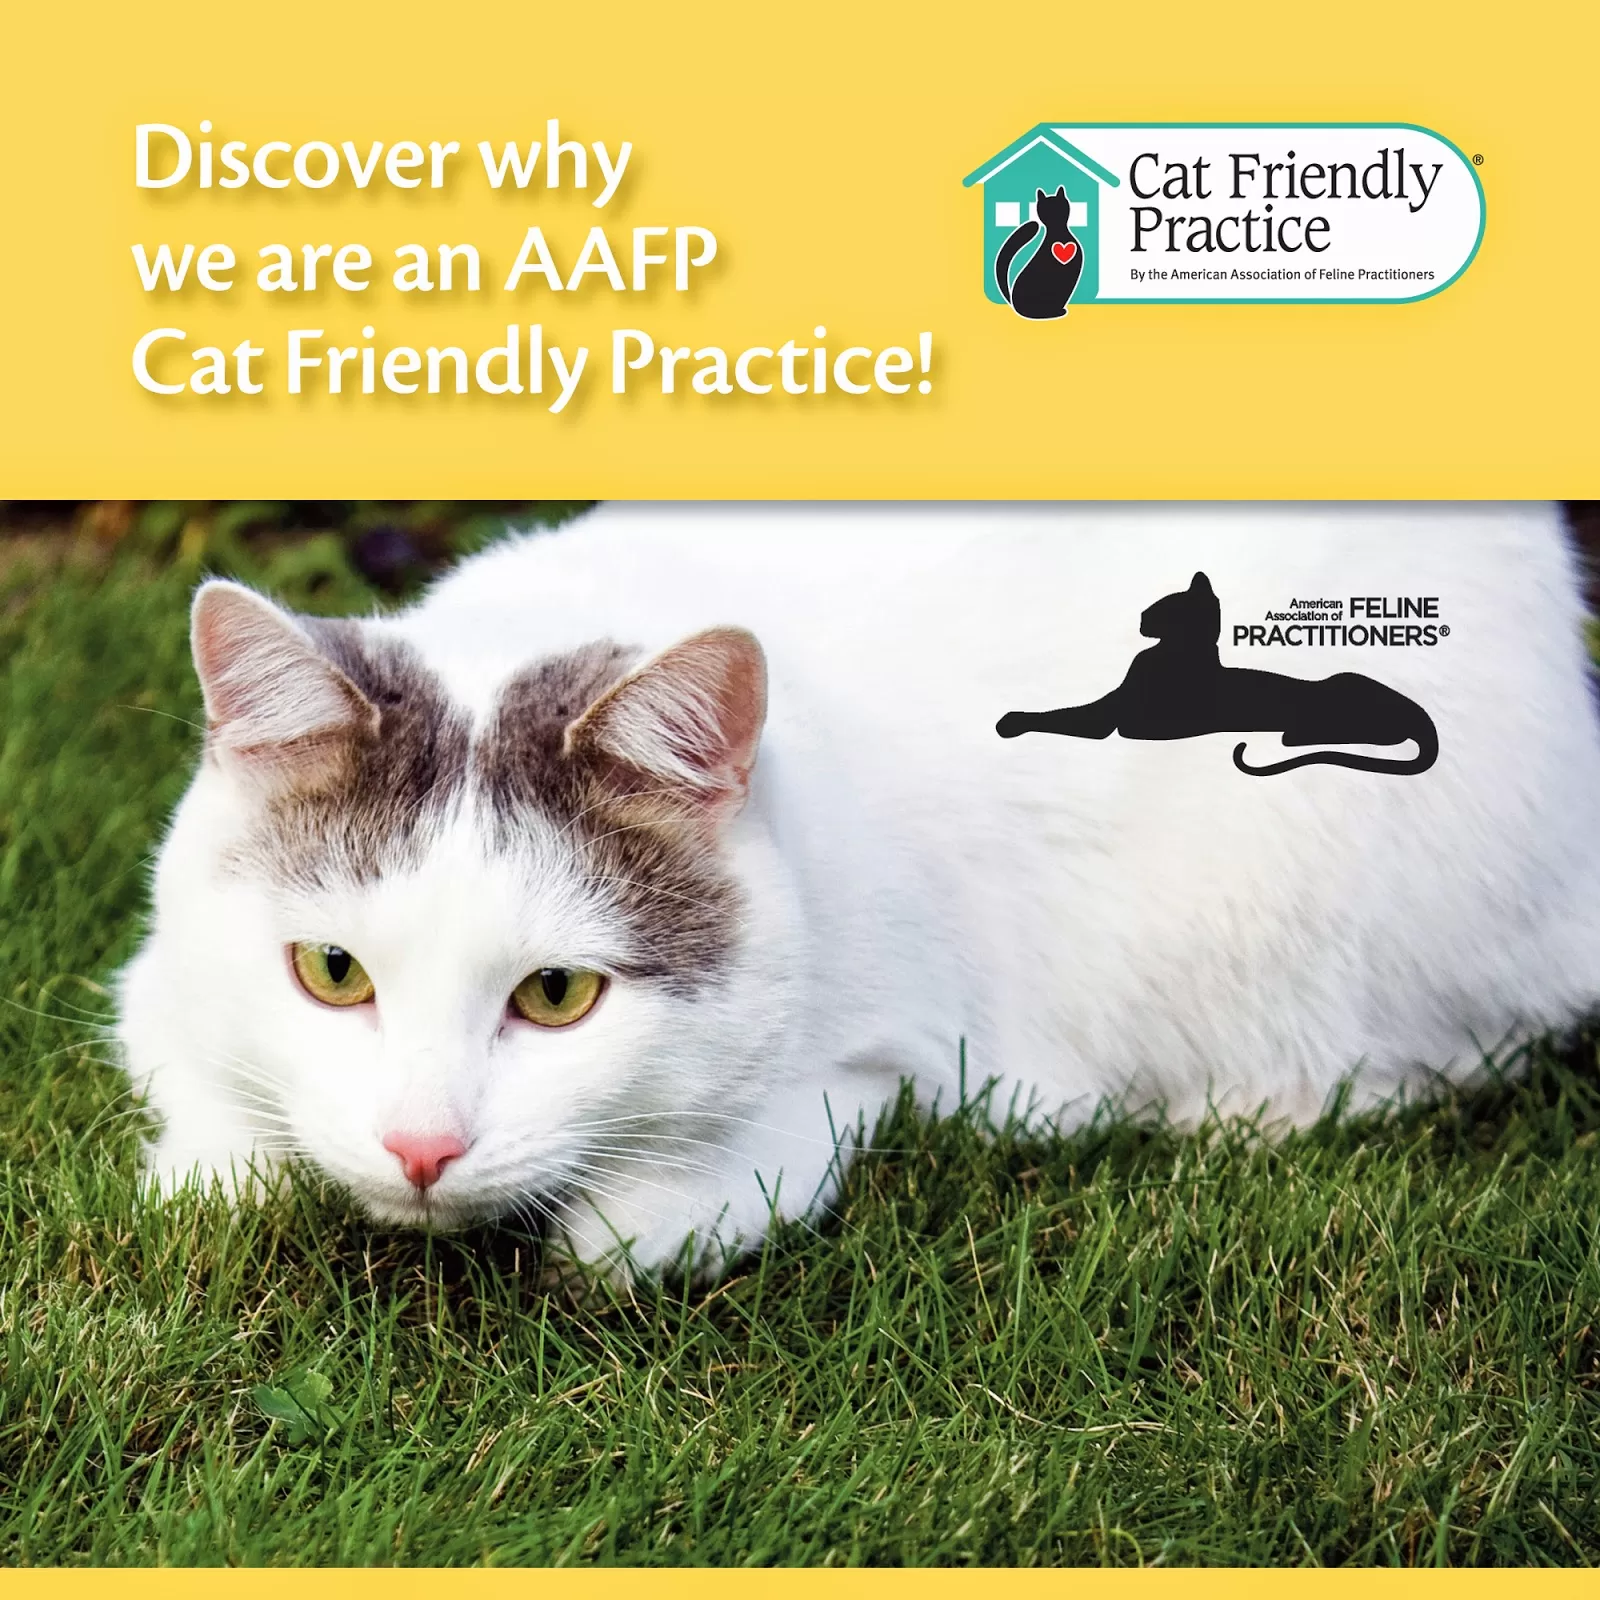 Discover why we are an AAFP Cat Friendly Practice!